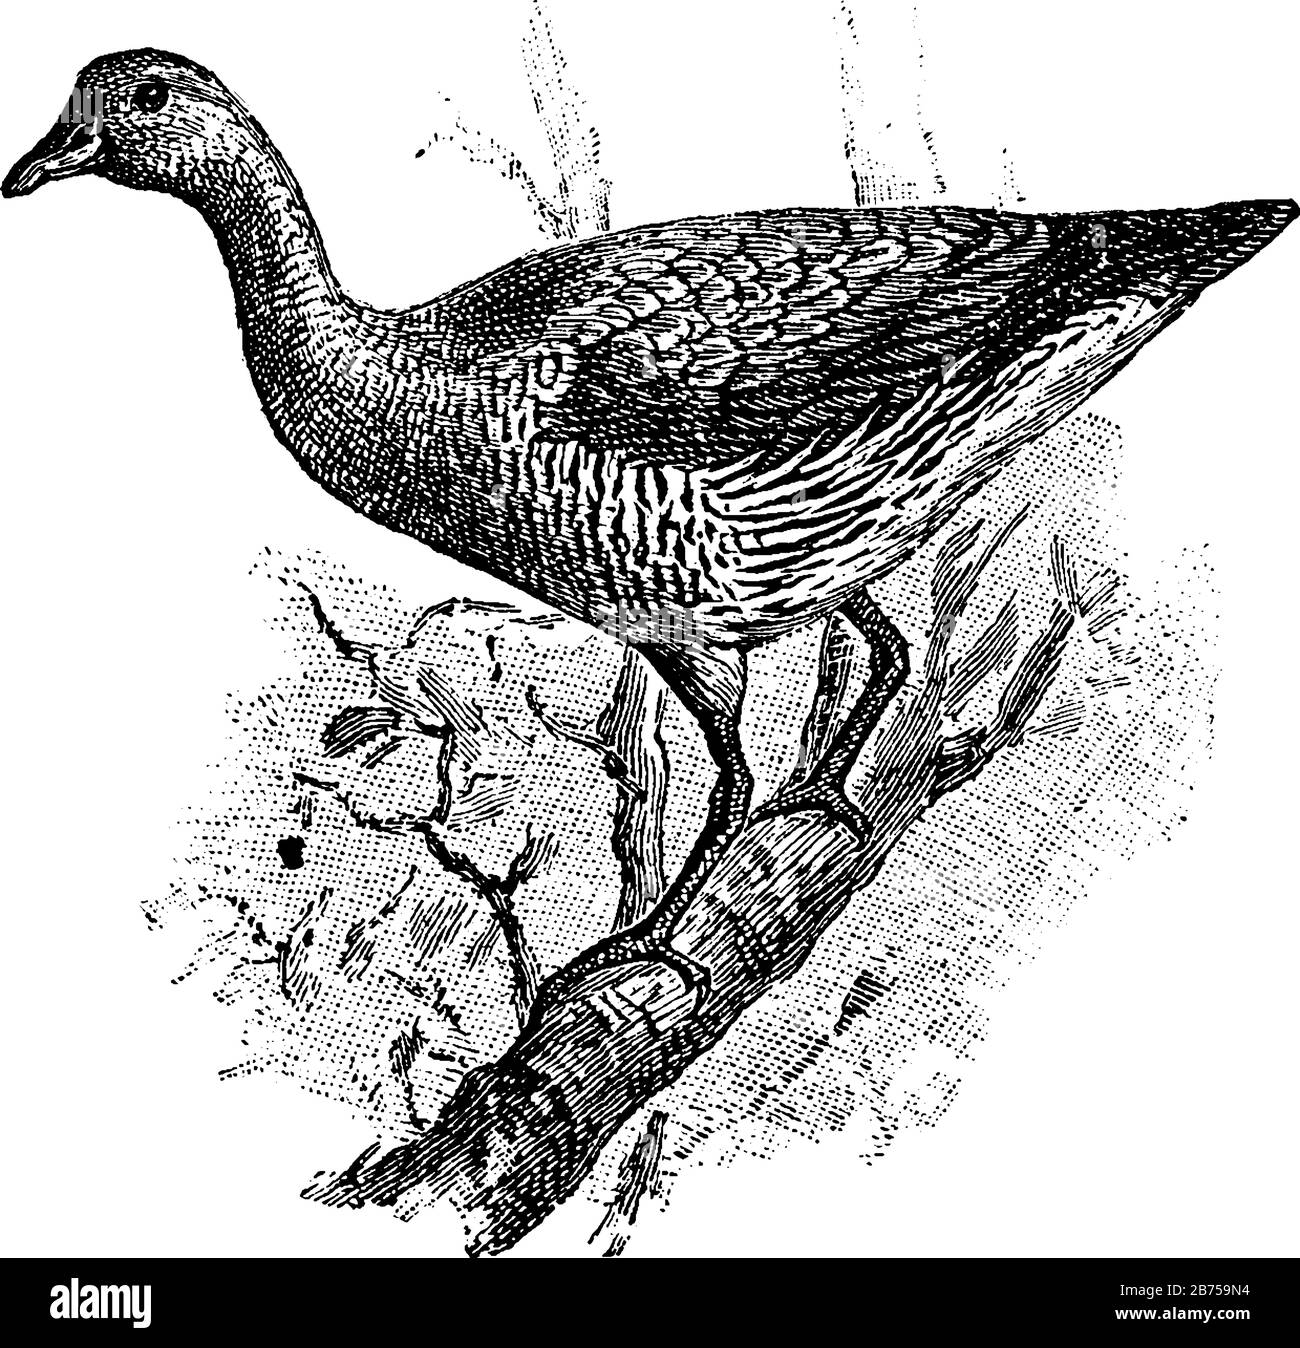 Australian Tree Duck with a bill longer than its head and curved downward, vintage line drawing or engraving illustration. Stock Vector